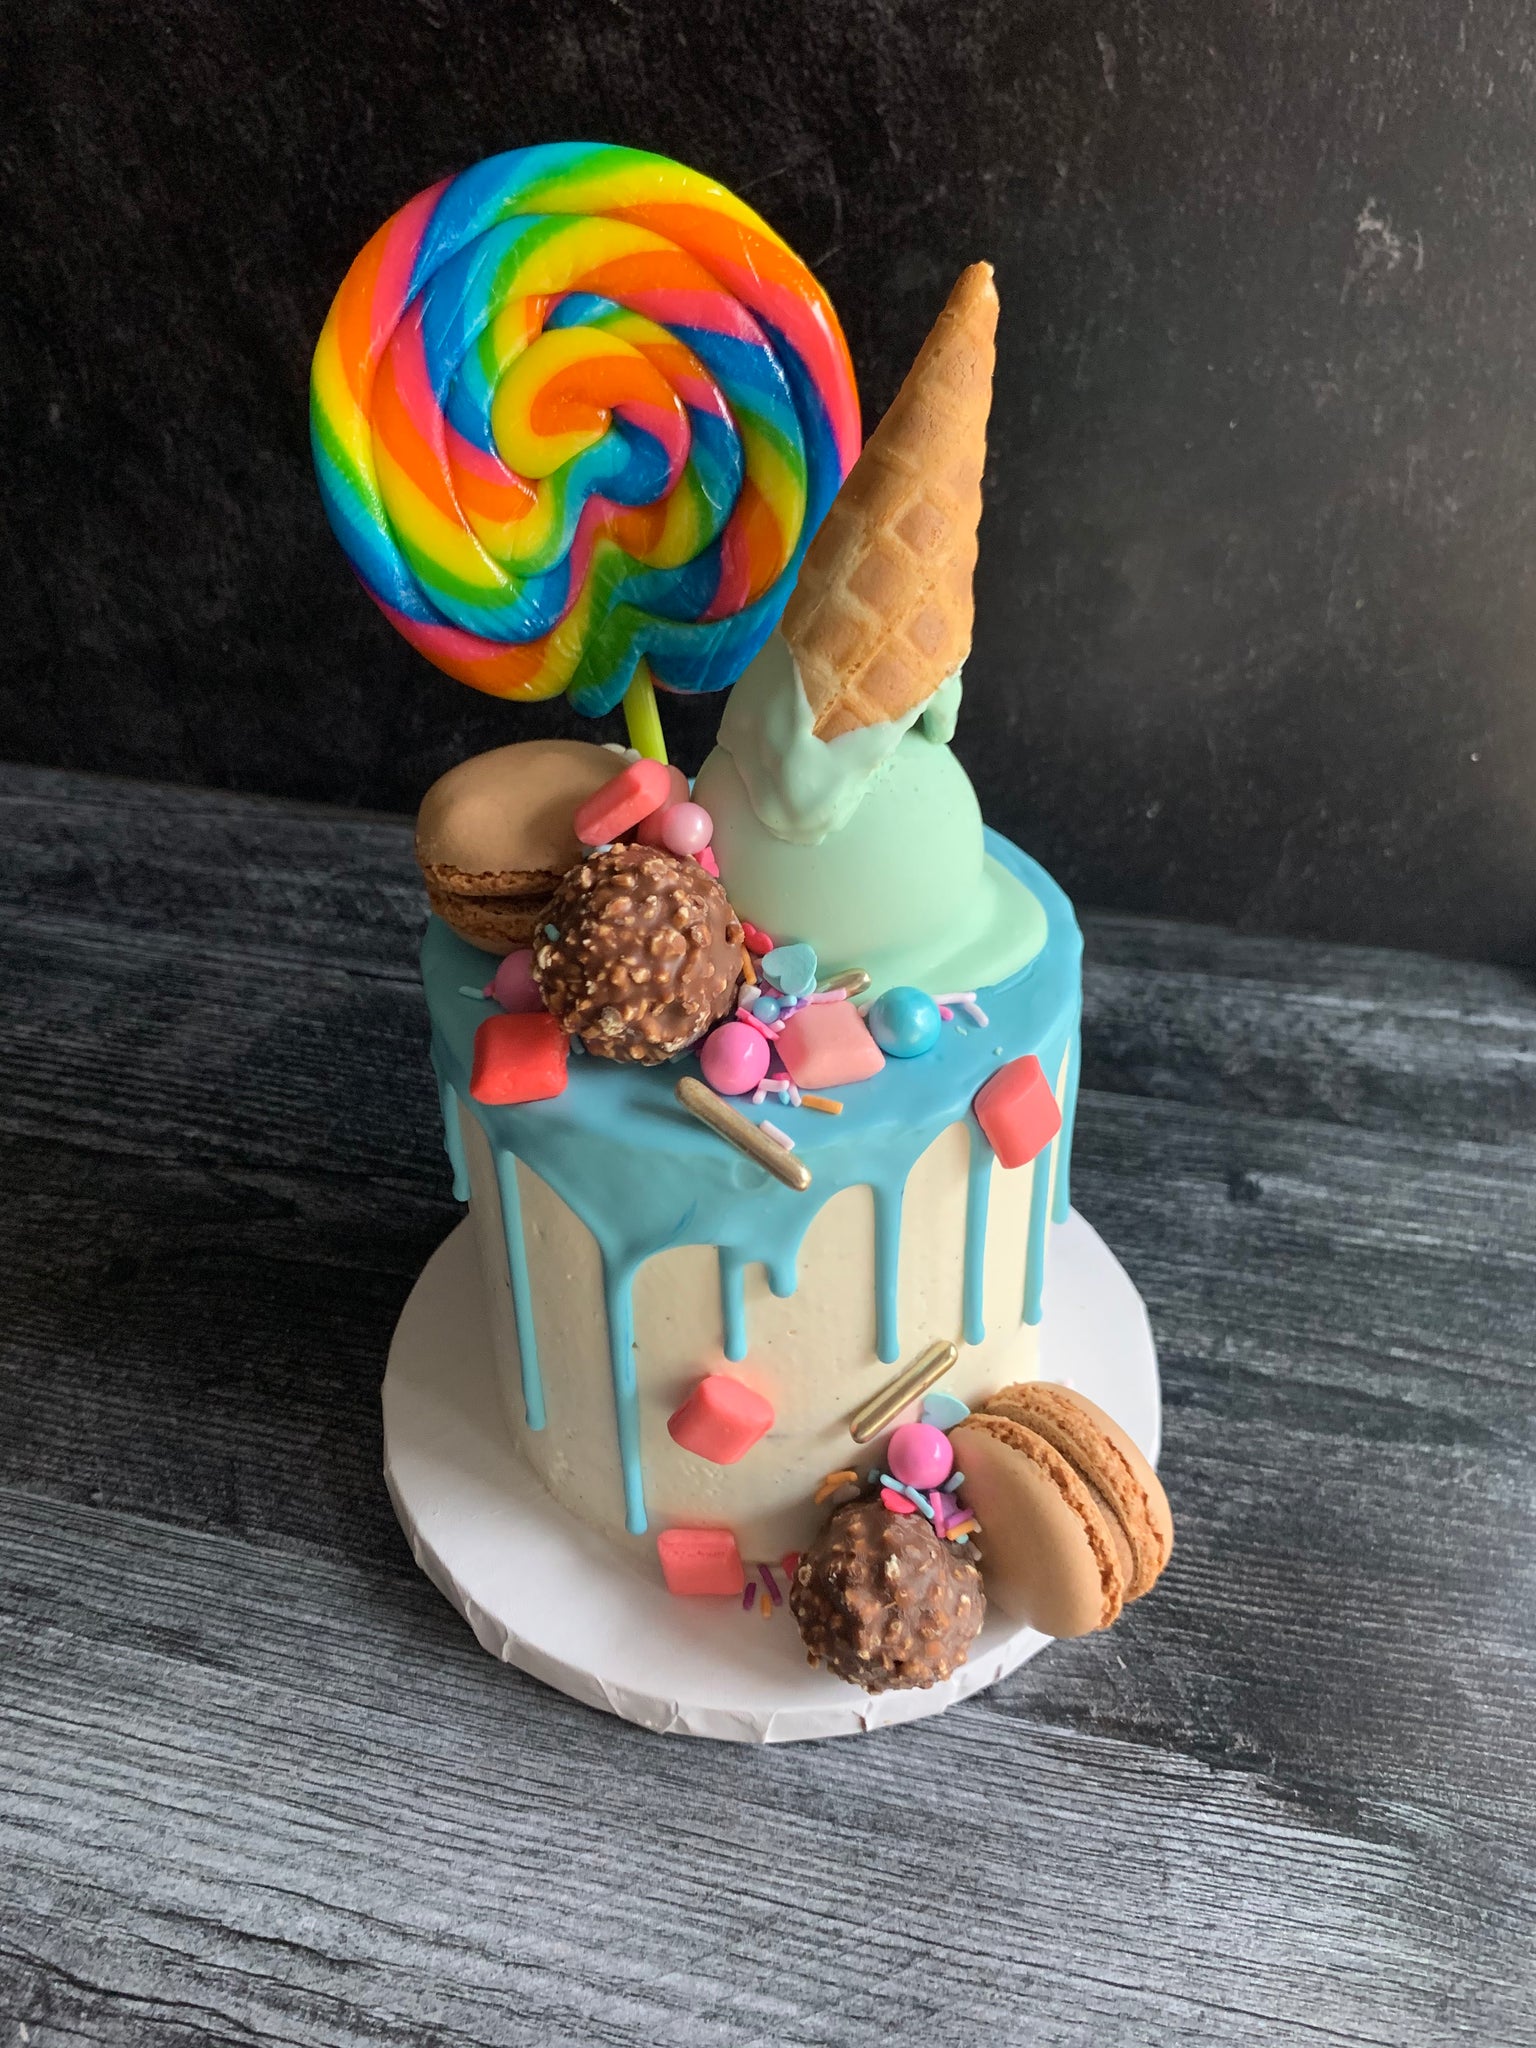 Cotton Candy Cake - Cake by Courtney